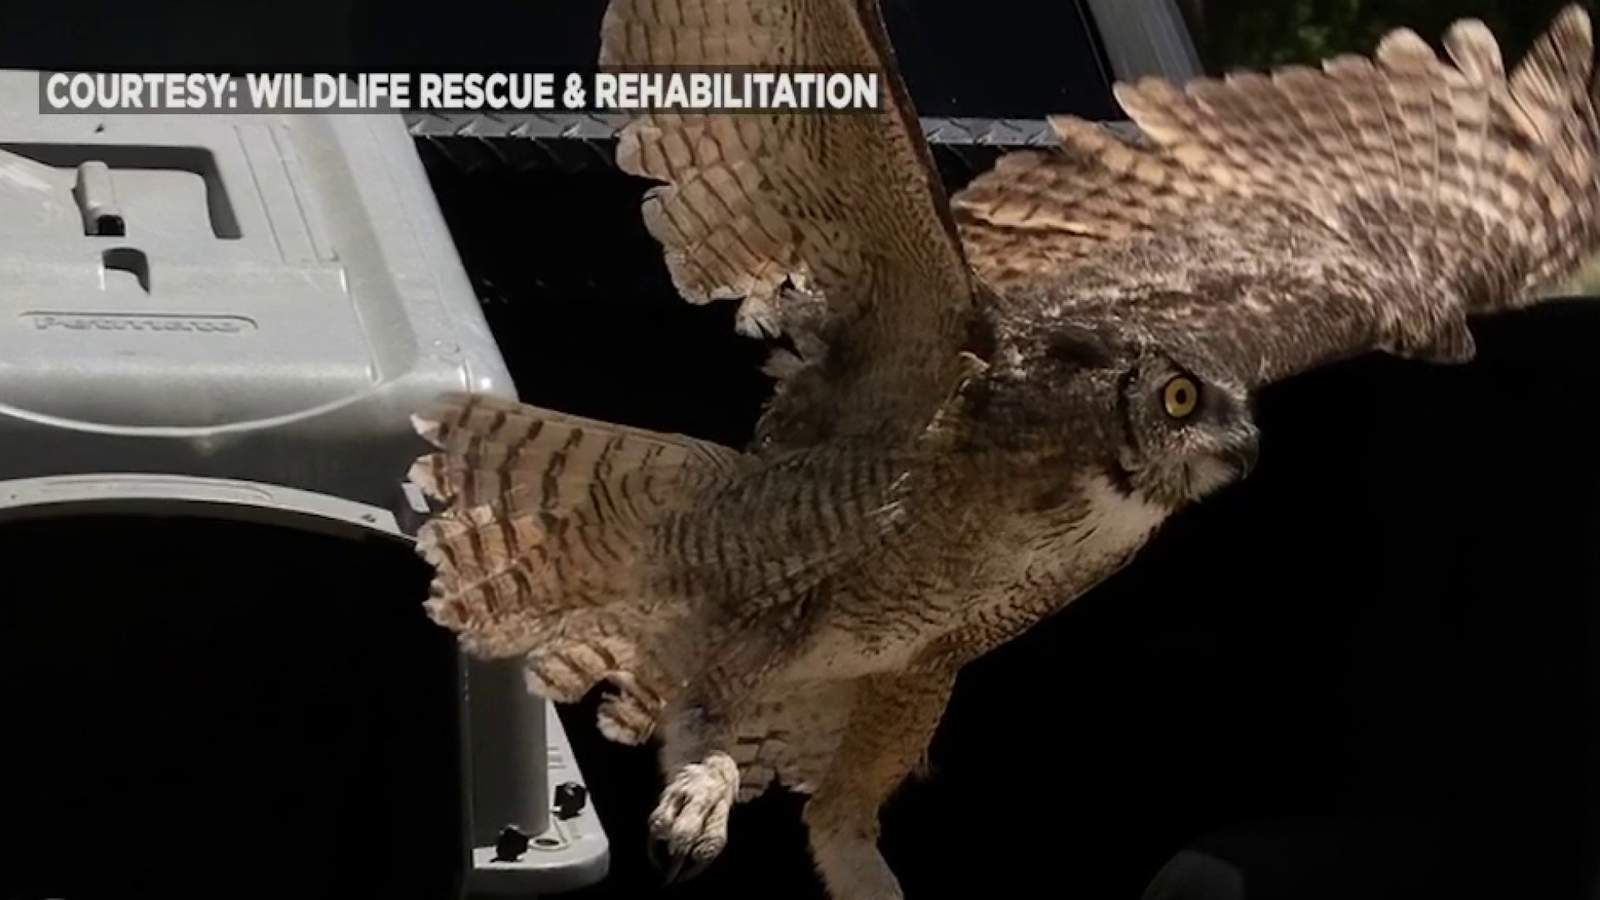 Great Horned Owl flying free over San Antonio again after rescue